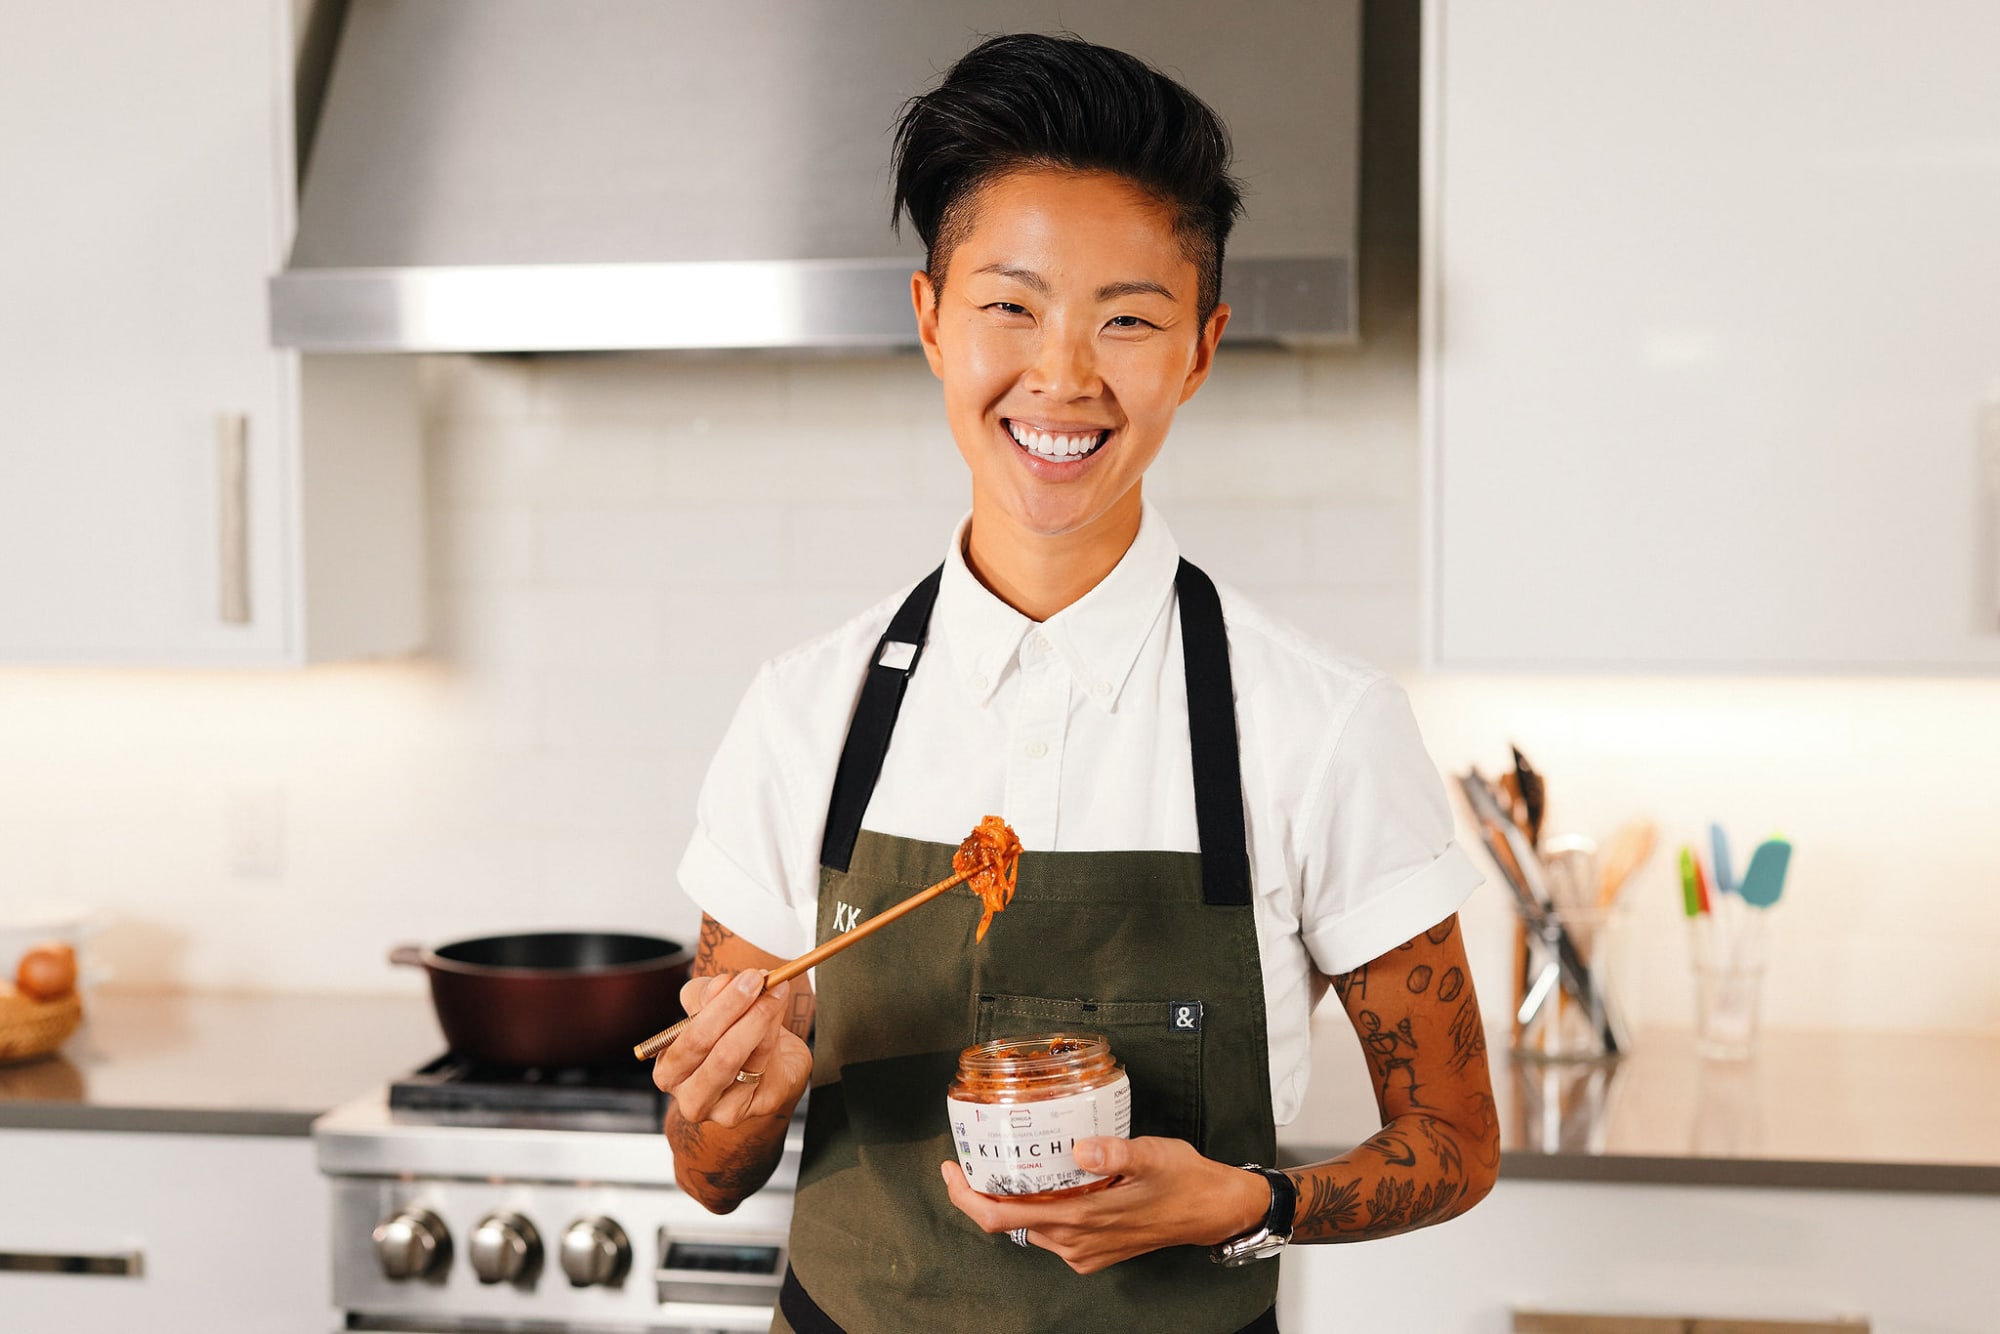 Kristen Kish explains how cooking with kimchi is far from intimidating